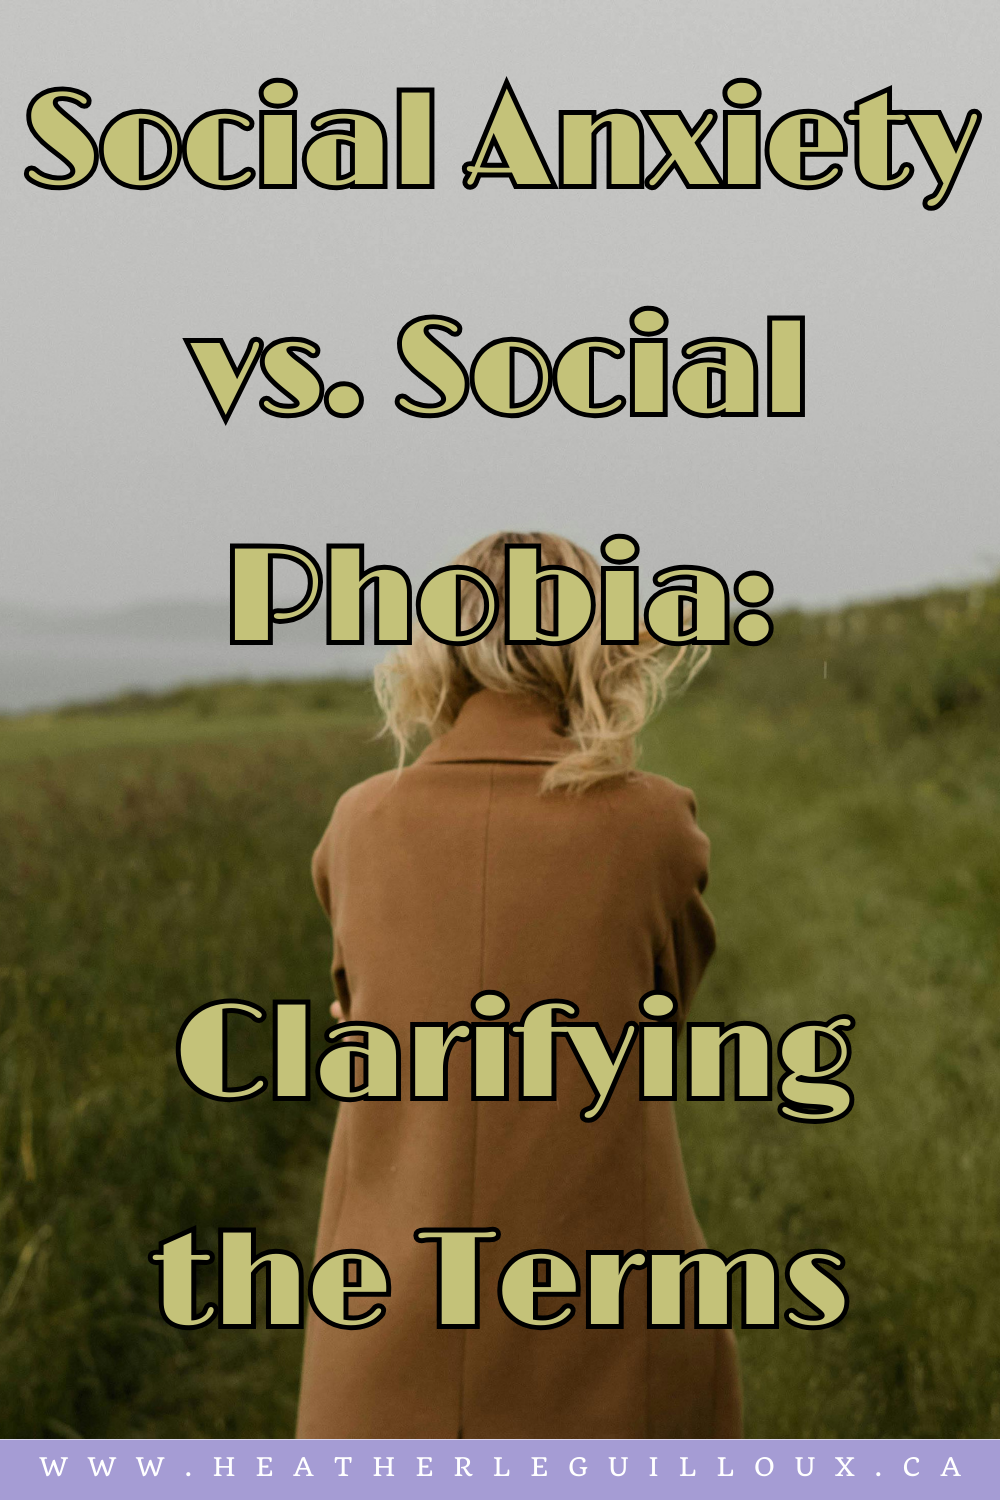 A lot of people deal with some degree of social anxiety in today's high-stress environment. But what exactly is that? Not to mention, is it the same thing as social phobia? This article delves more into understanding what the disorder means, its identifying symptoms, and the difference with social phobia. #socialanxiety #socialphobia #mentalhealth #mentalhealthblog